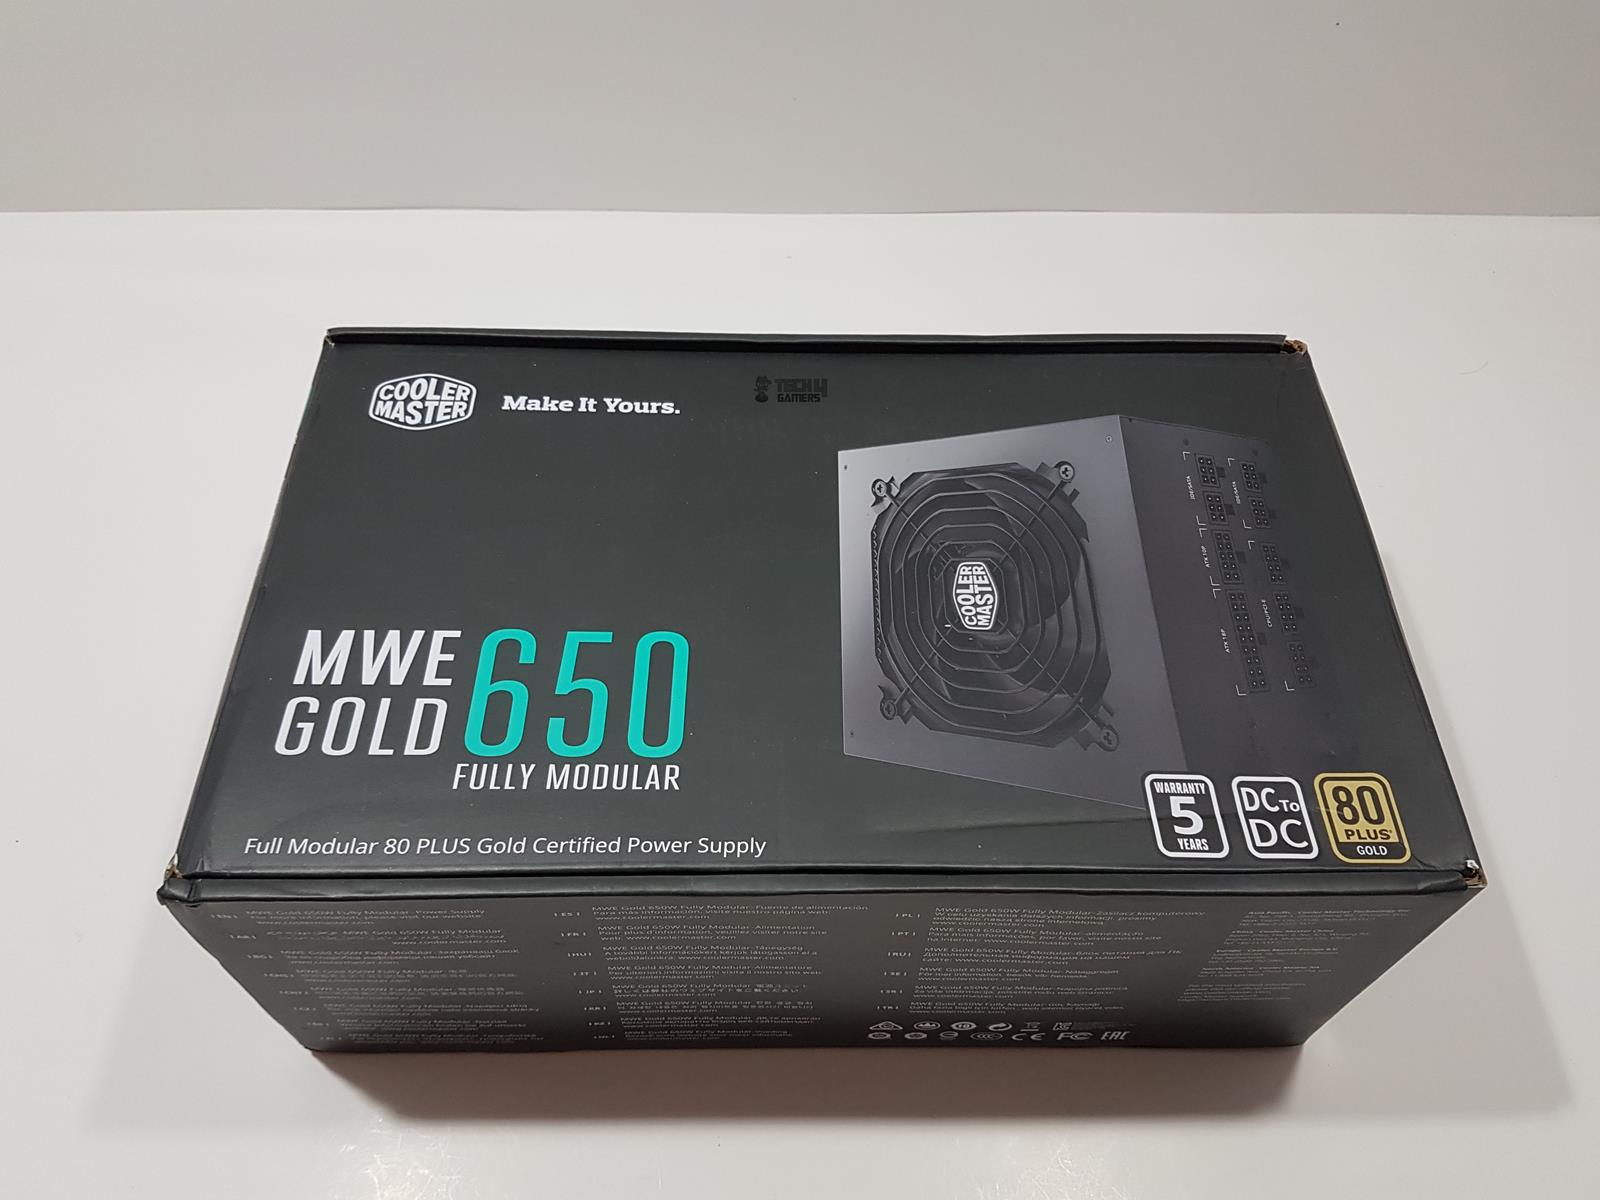 MWE GOLD 650W Packaging and Unboxing